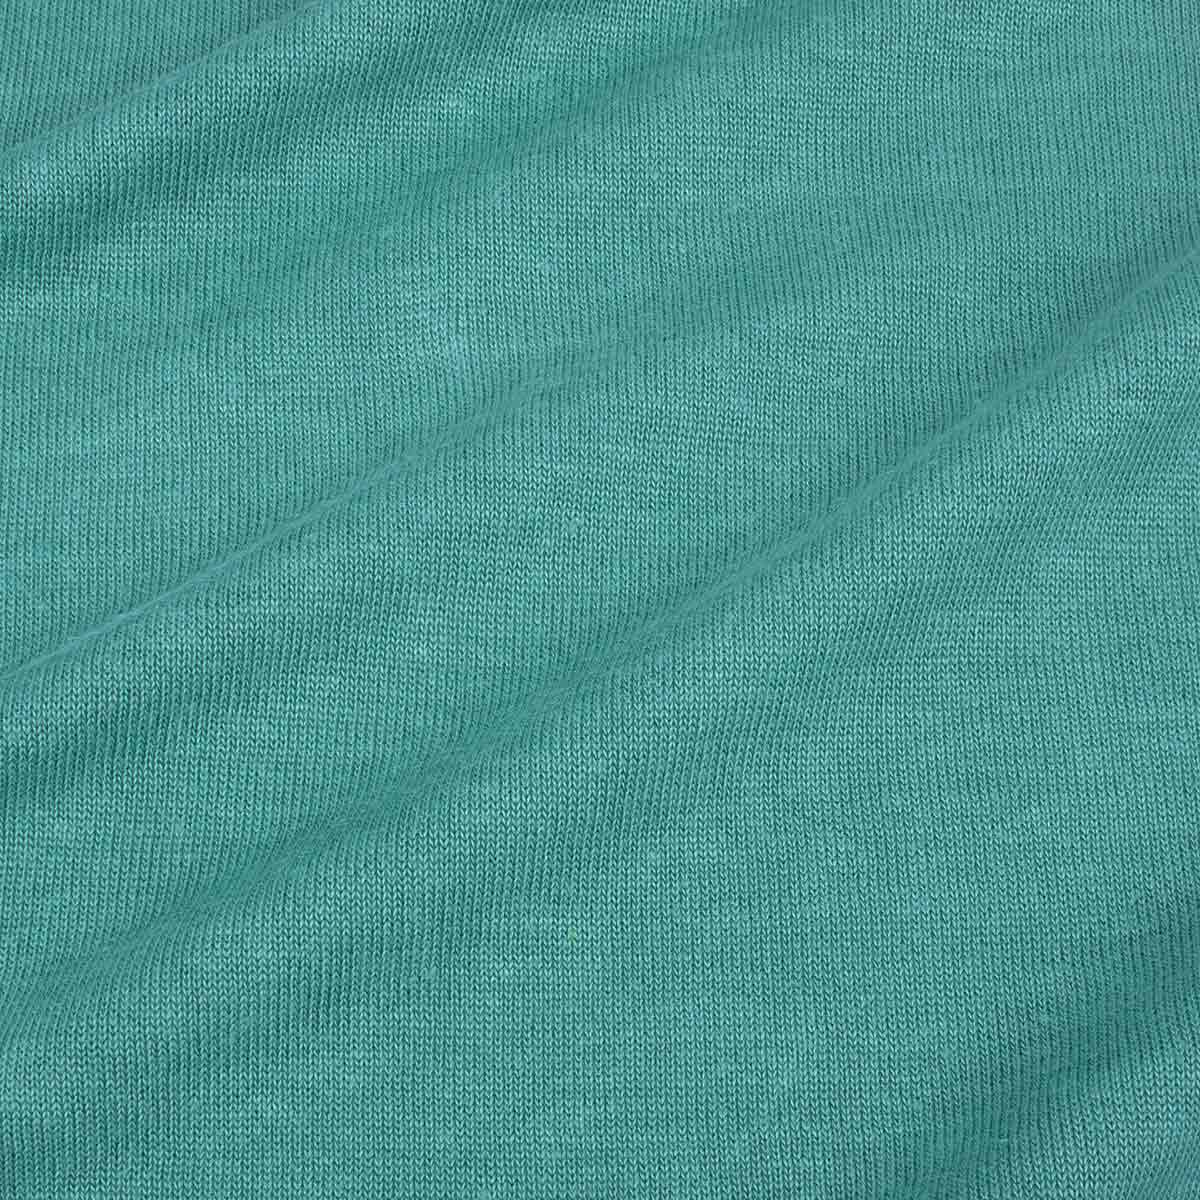 Jersey from European hemp in teal colour